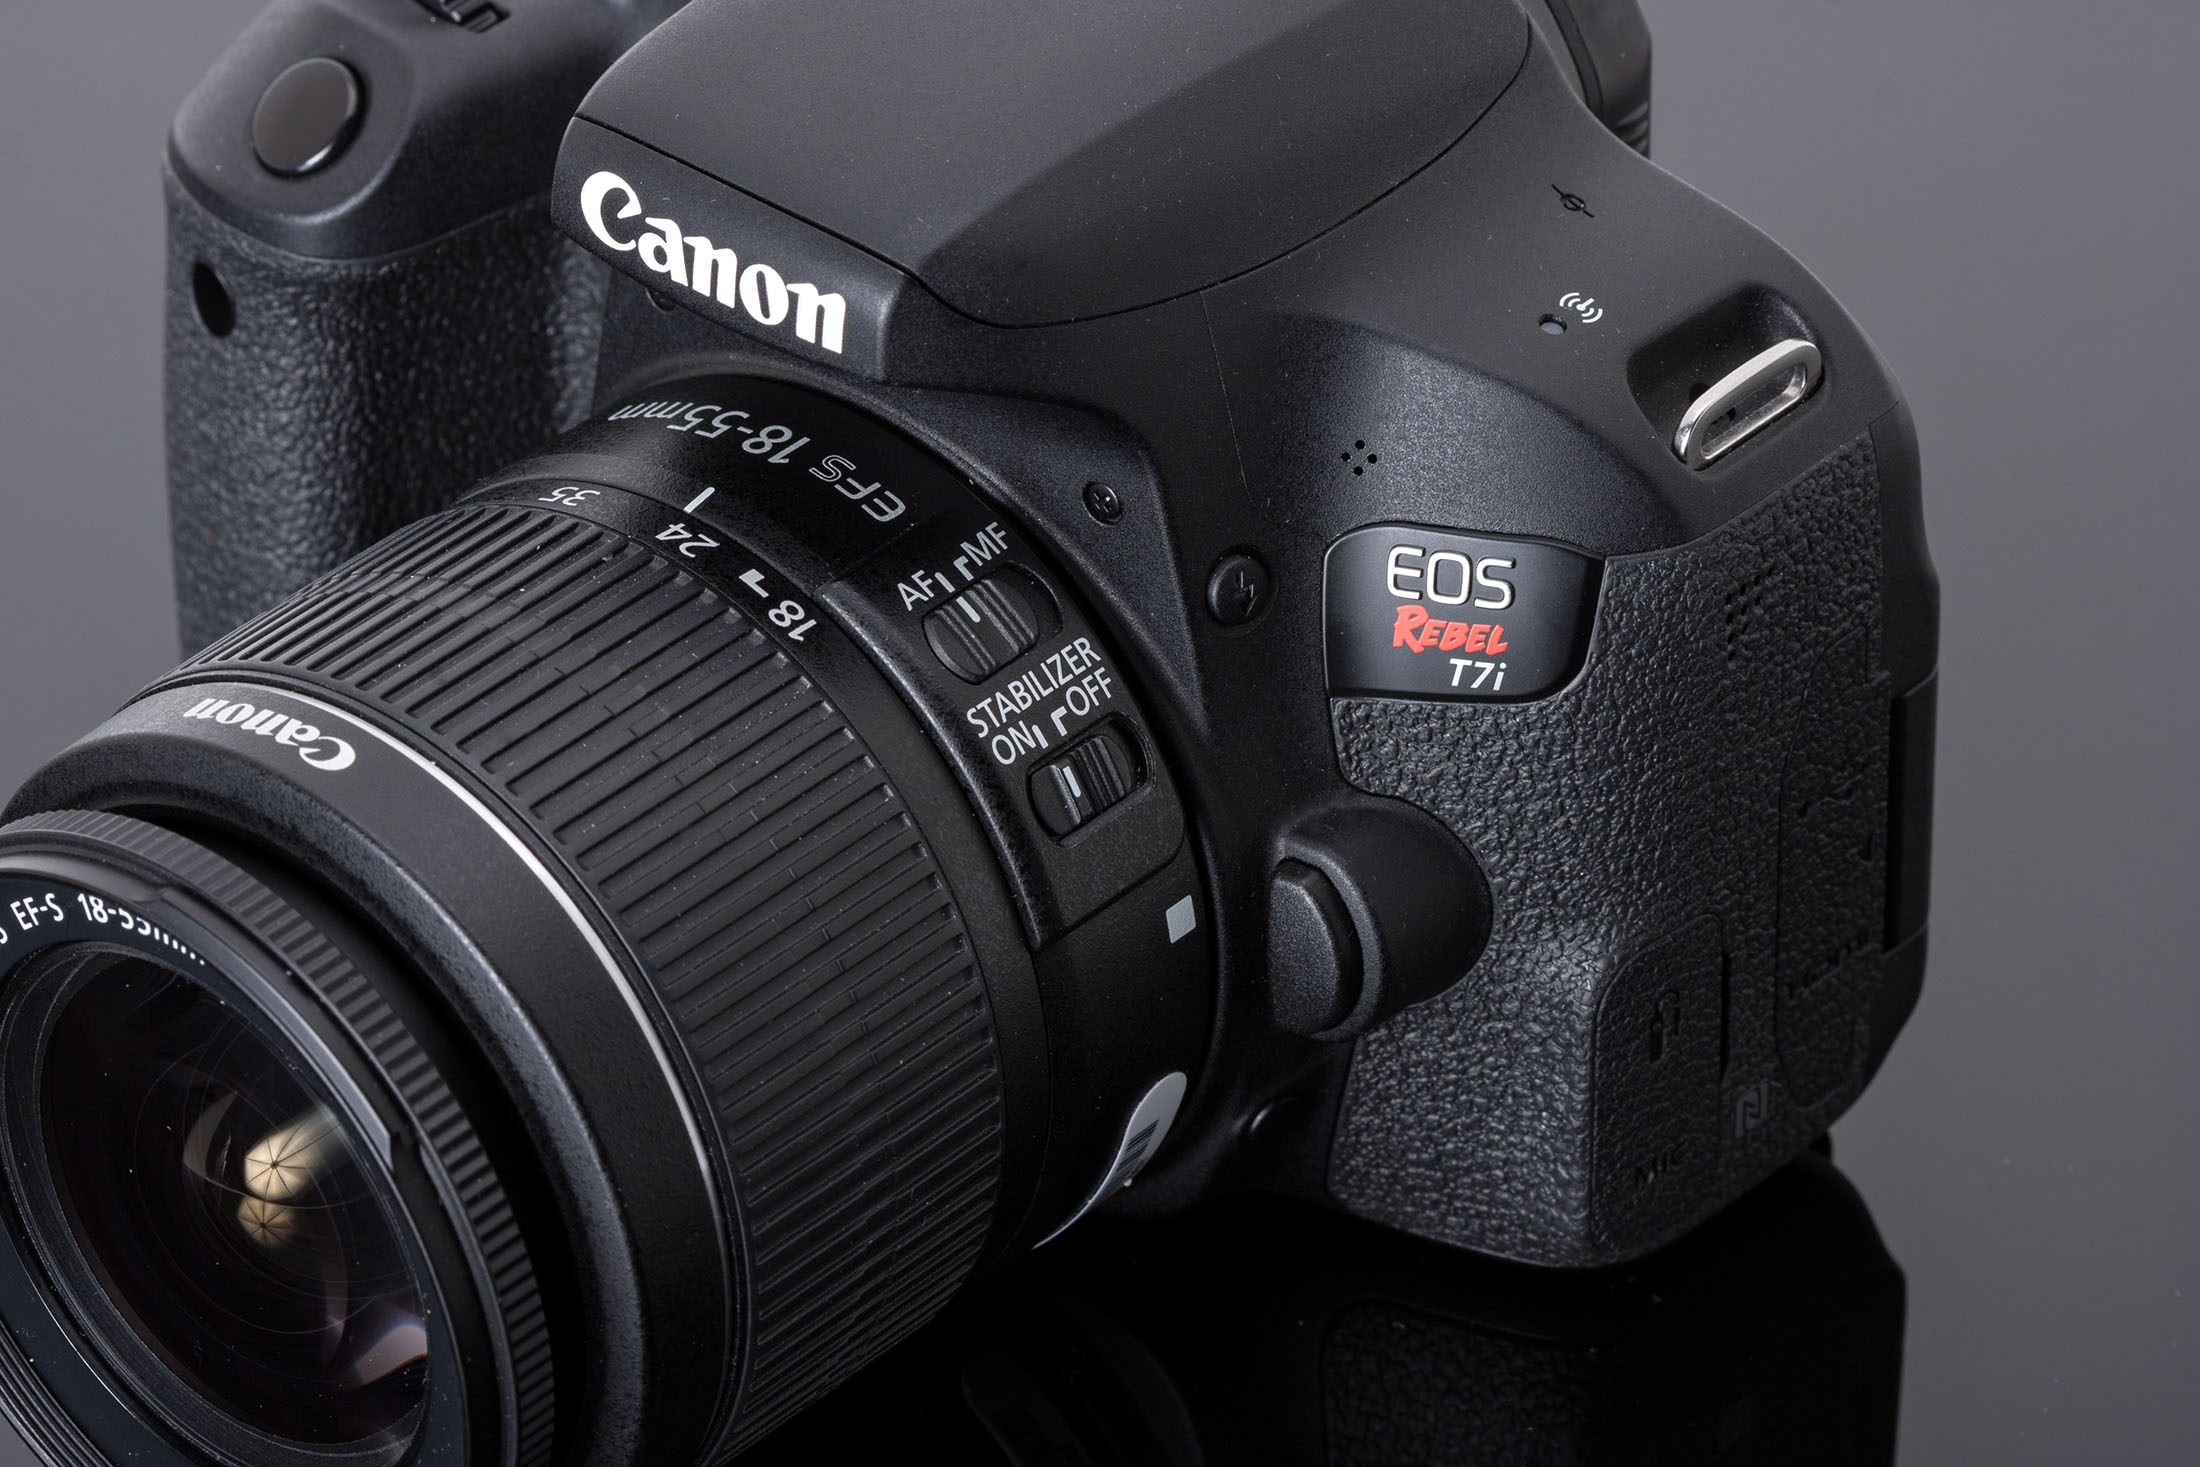 Canon EOS Rebel T7i/800D review